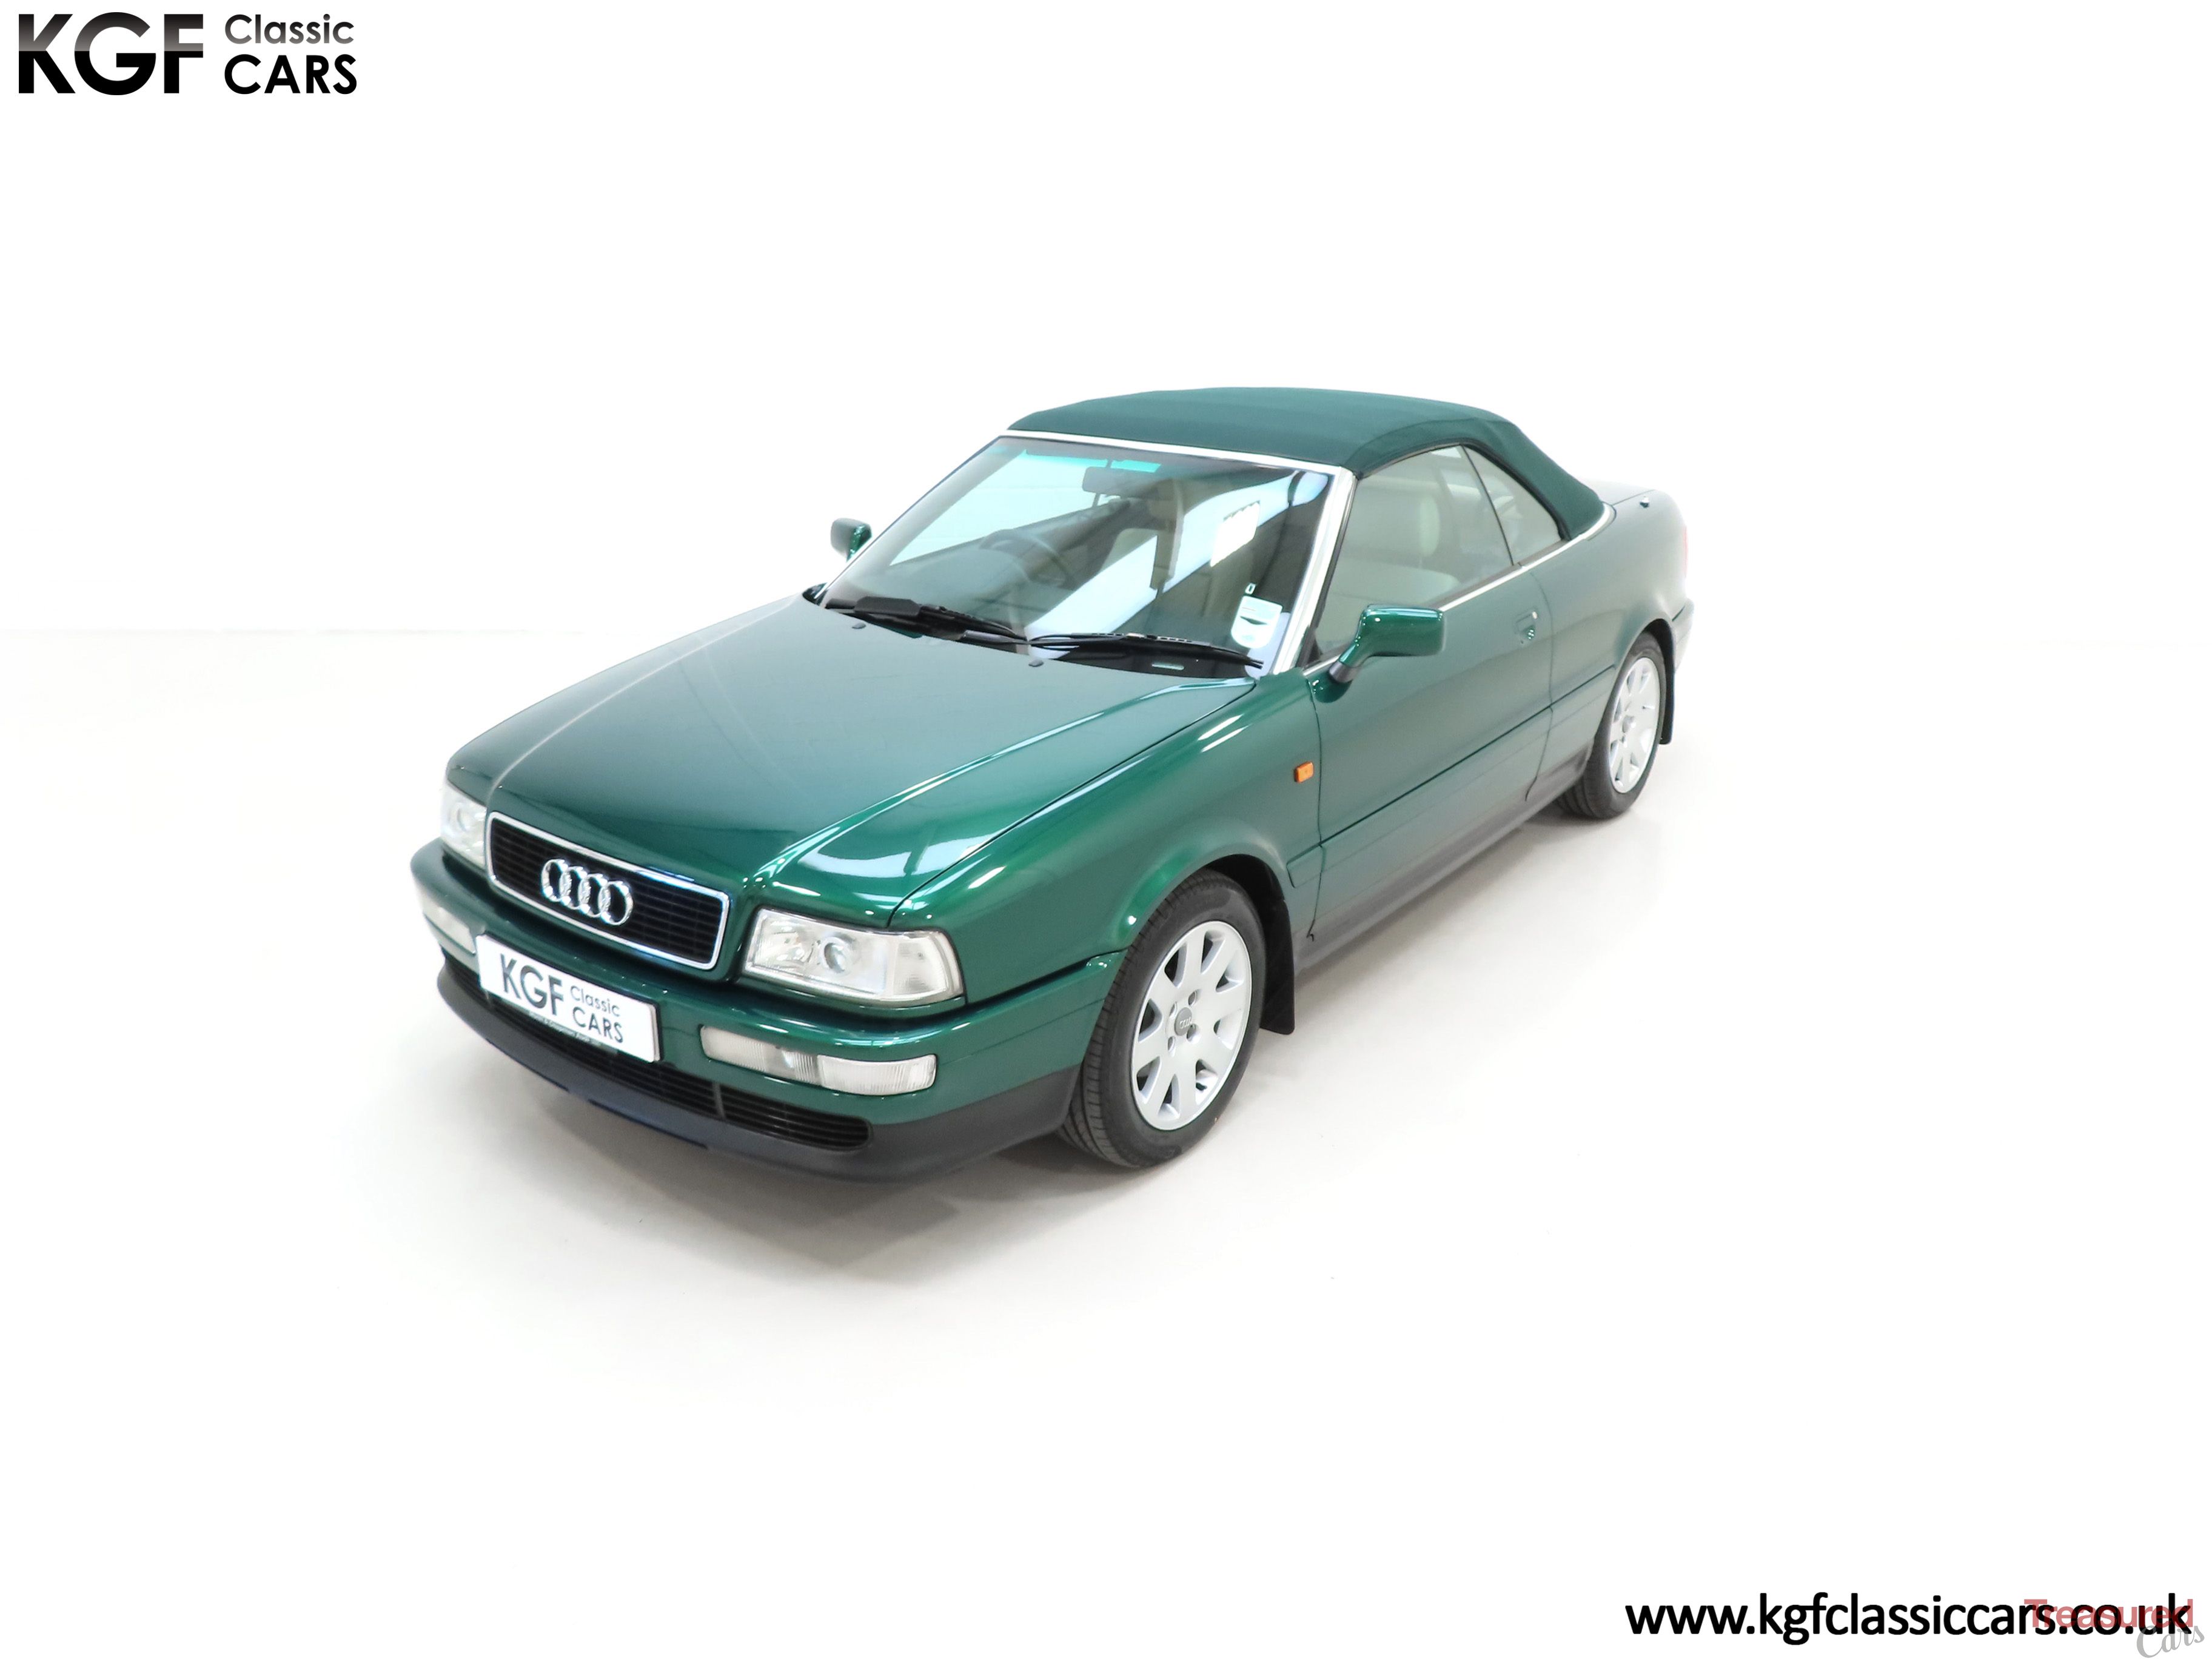 1998 Audi Cabriolet Classic Cars for sale - Treasured Cars